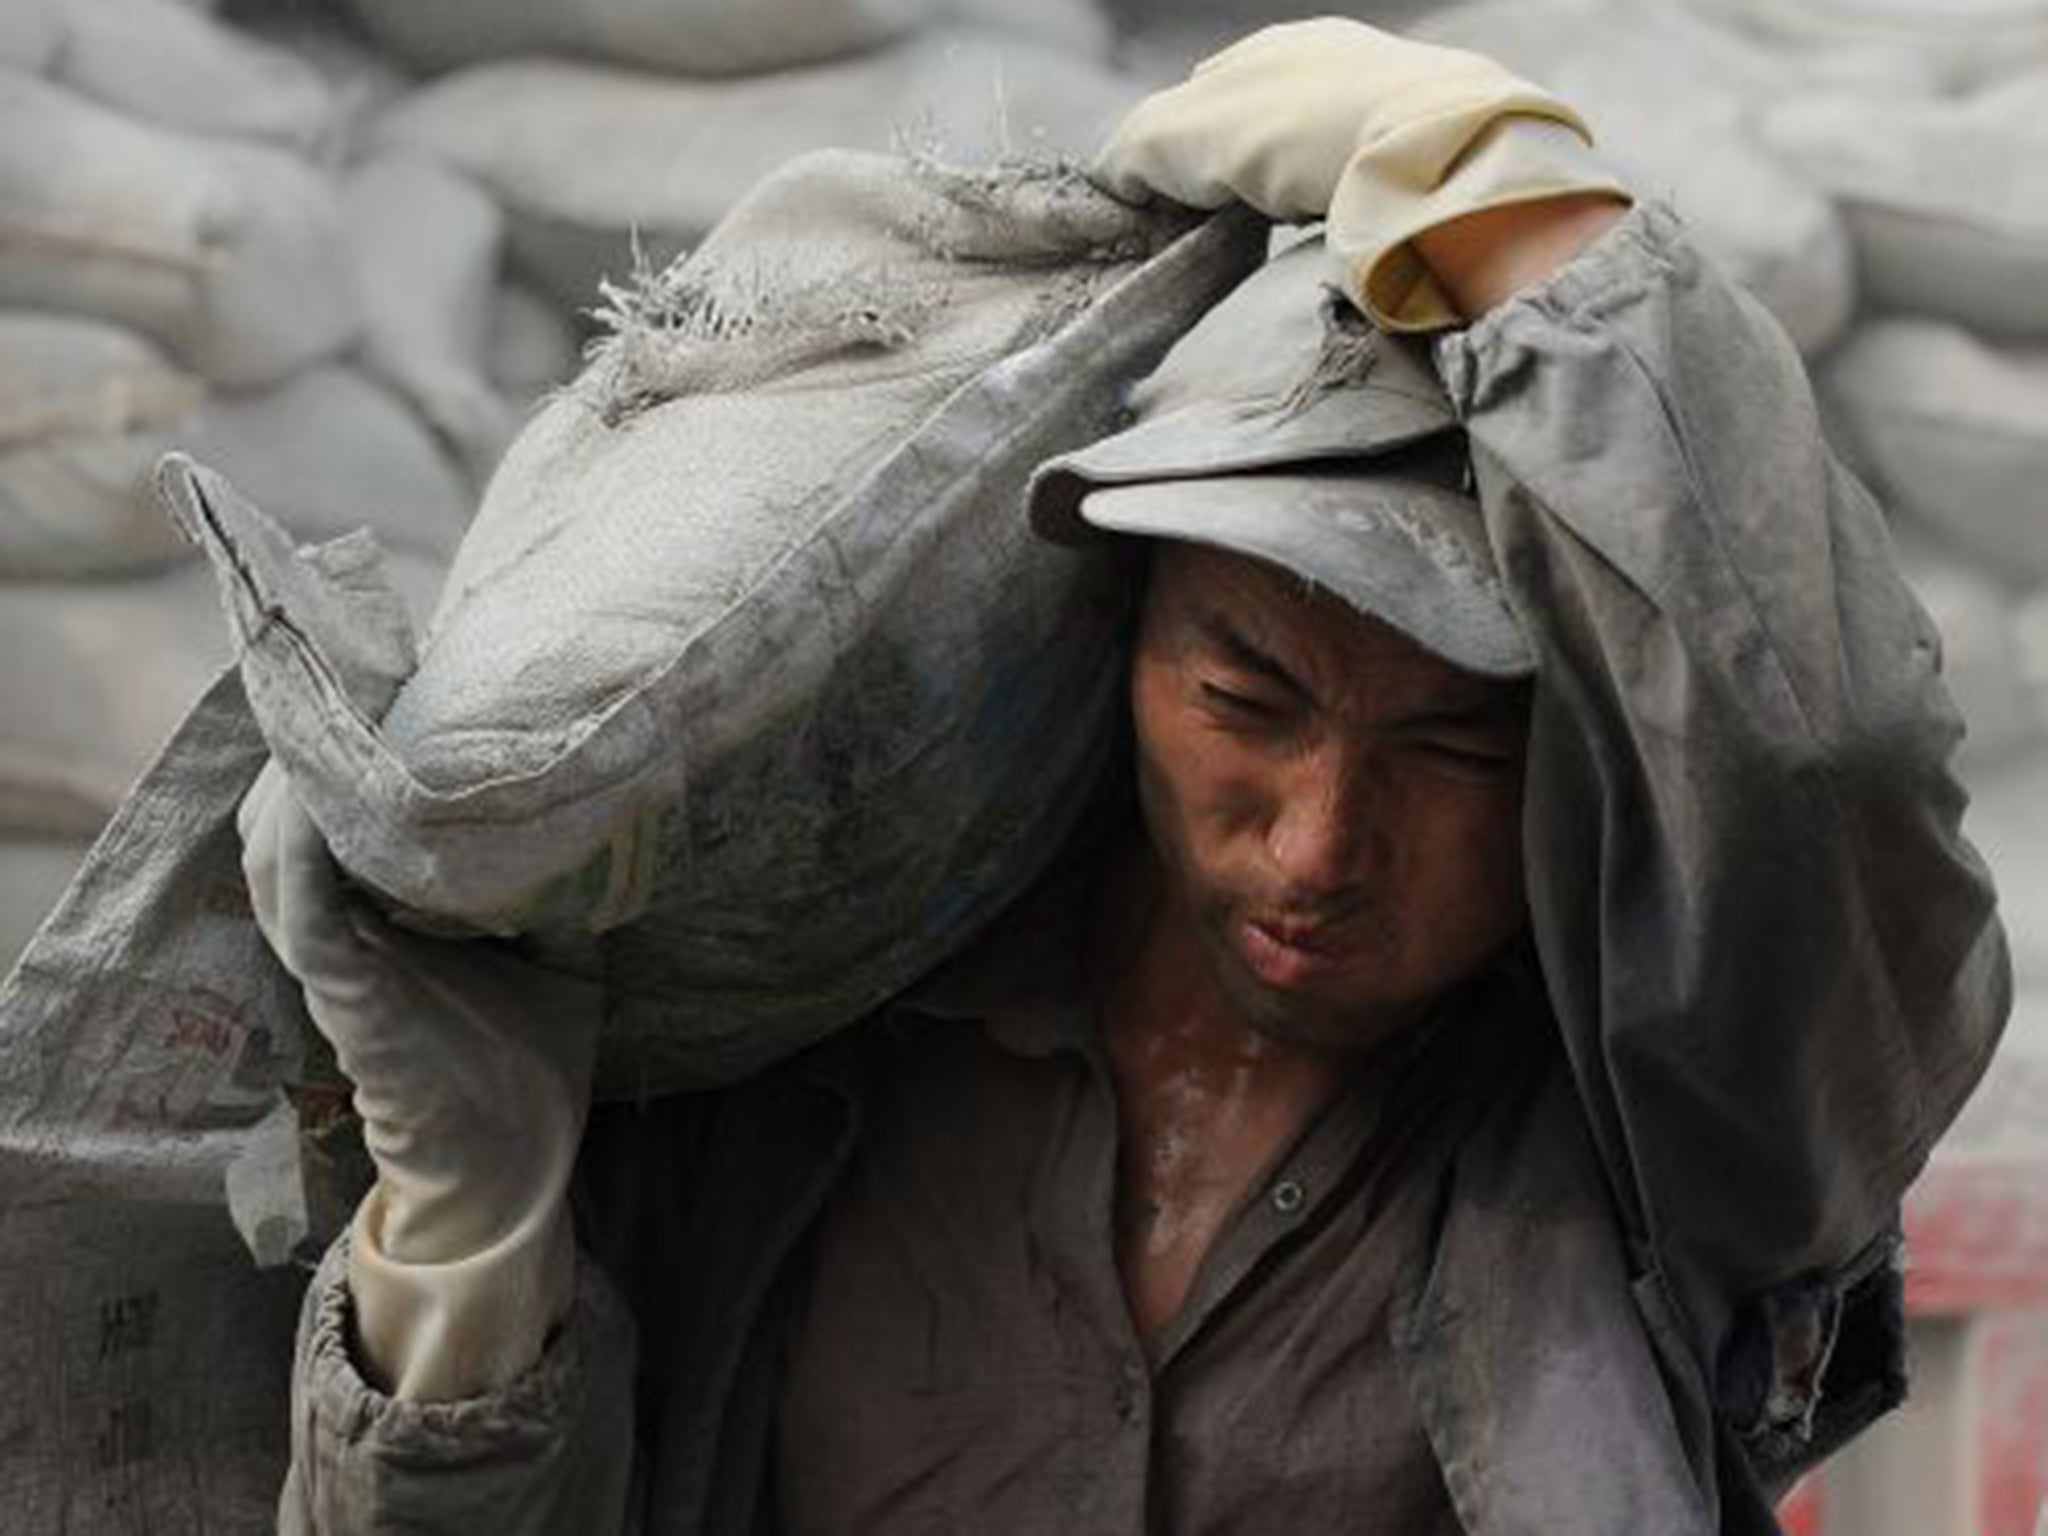 Grey matter: a Chinese worker delivers bags of cement at a construction site in Hefei in east China’s Anhui province